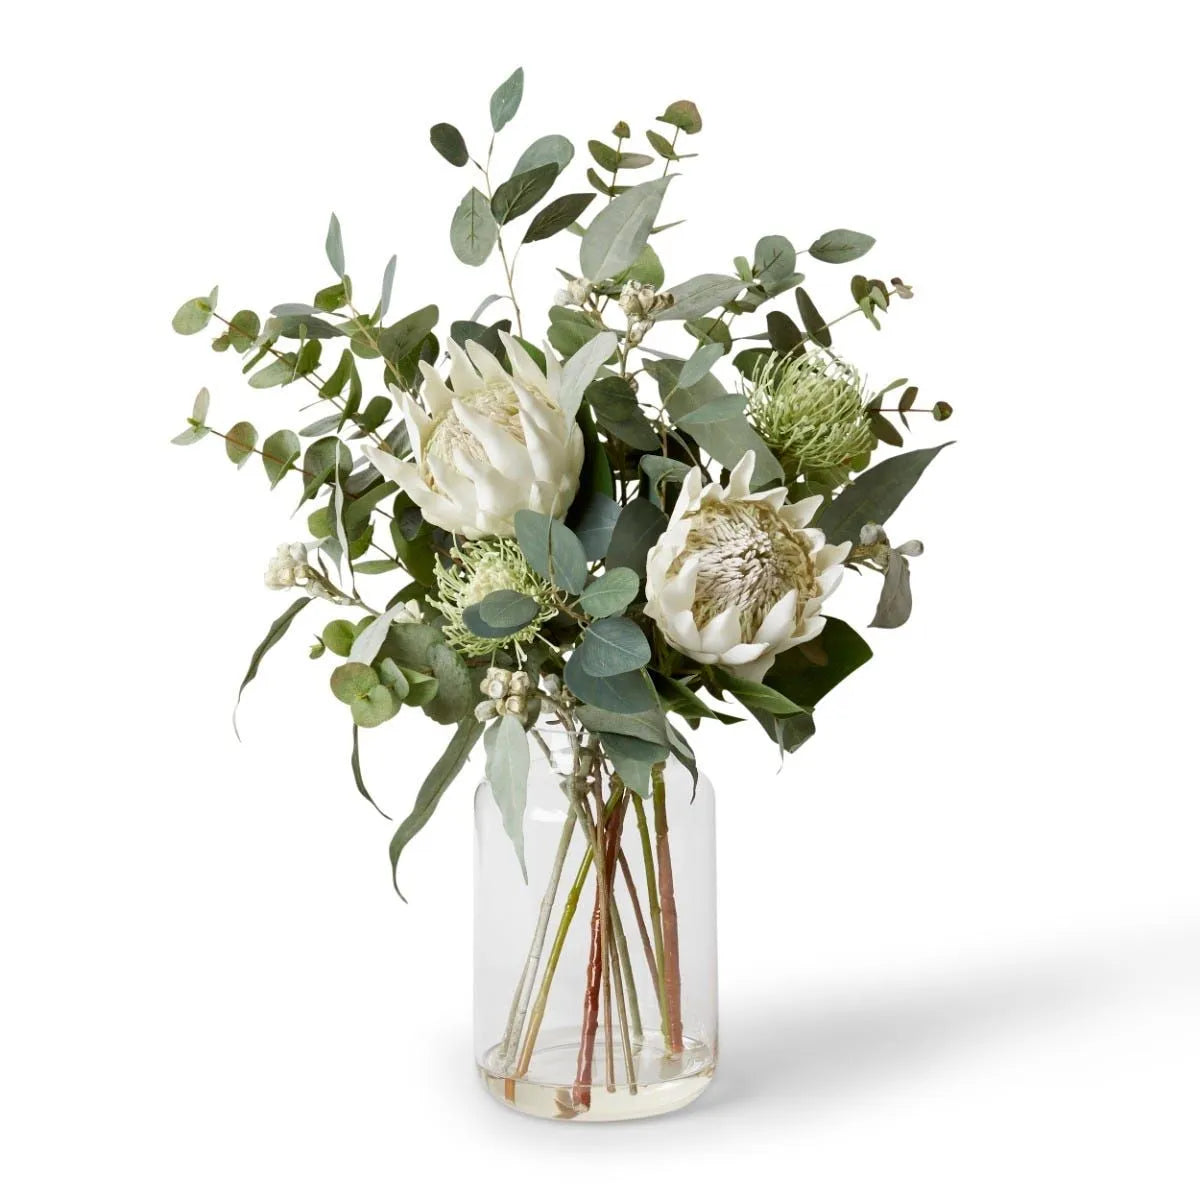 This Protea Pin Mix Tillie Vase White - 70cm is the perfect way to bring a touch of nature into your home. With remarkably realistic details, this delicate vase is the perfect way to enjoy the beauty of greenery and flowers without the hassle of watering it.